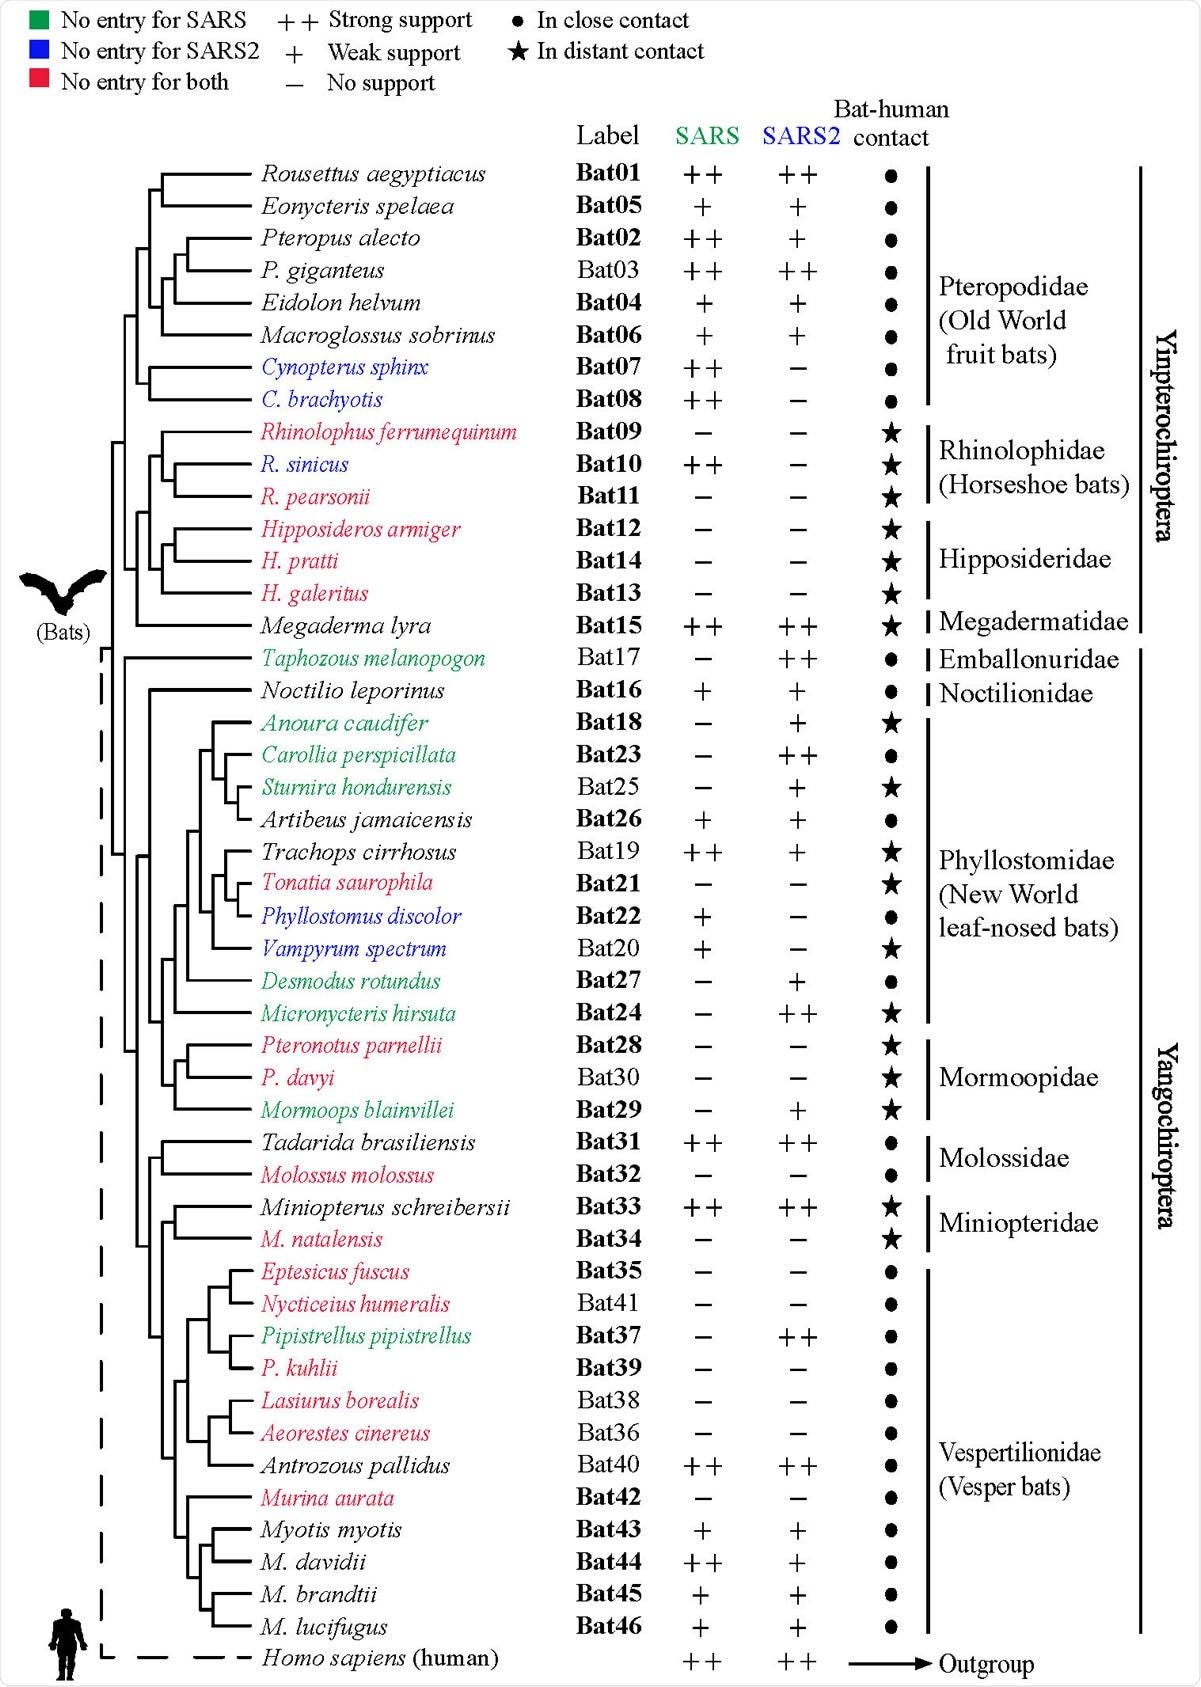 Phylogenetic tree of 46 bat species in this study. Labels of bat species in our experiments are indicated. Infection abilities of bat ACE2 to support SARS-CoV and SARS CoV-2 entry are shown with different signs: infection data are indicated as % mean values of bat ACE2 supporting infection compared with the infection supported by human ACE2; infection efficiency smaller than 5% is indicated with a minus sign (-), between 5% and 50% a plus sign (+), and greater than 50% a double plus sign (++). Labels shown in bold indicate the bat species that have been examined by in silico analyses in a recent study . Bat phylogeny was taken from previous studies.